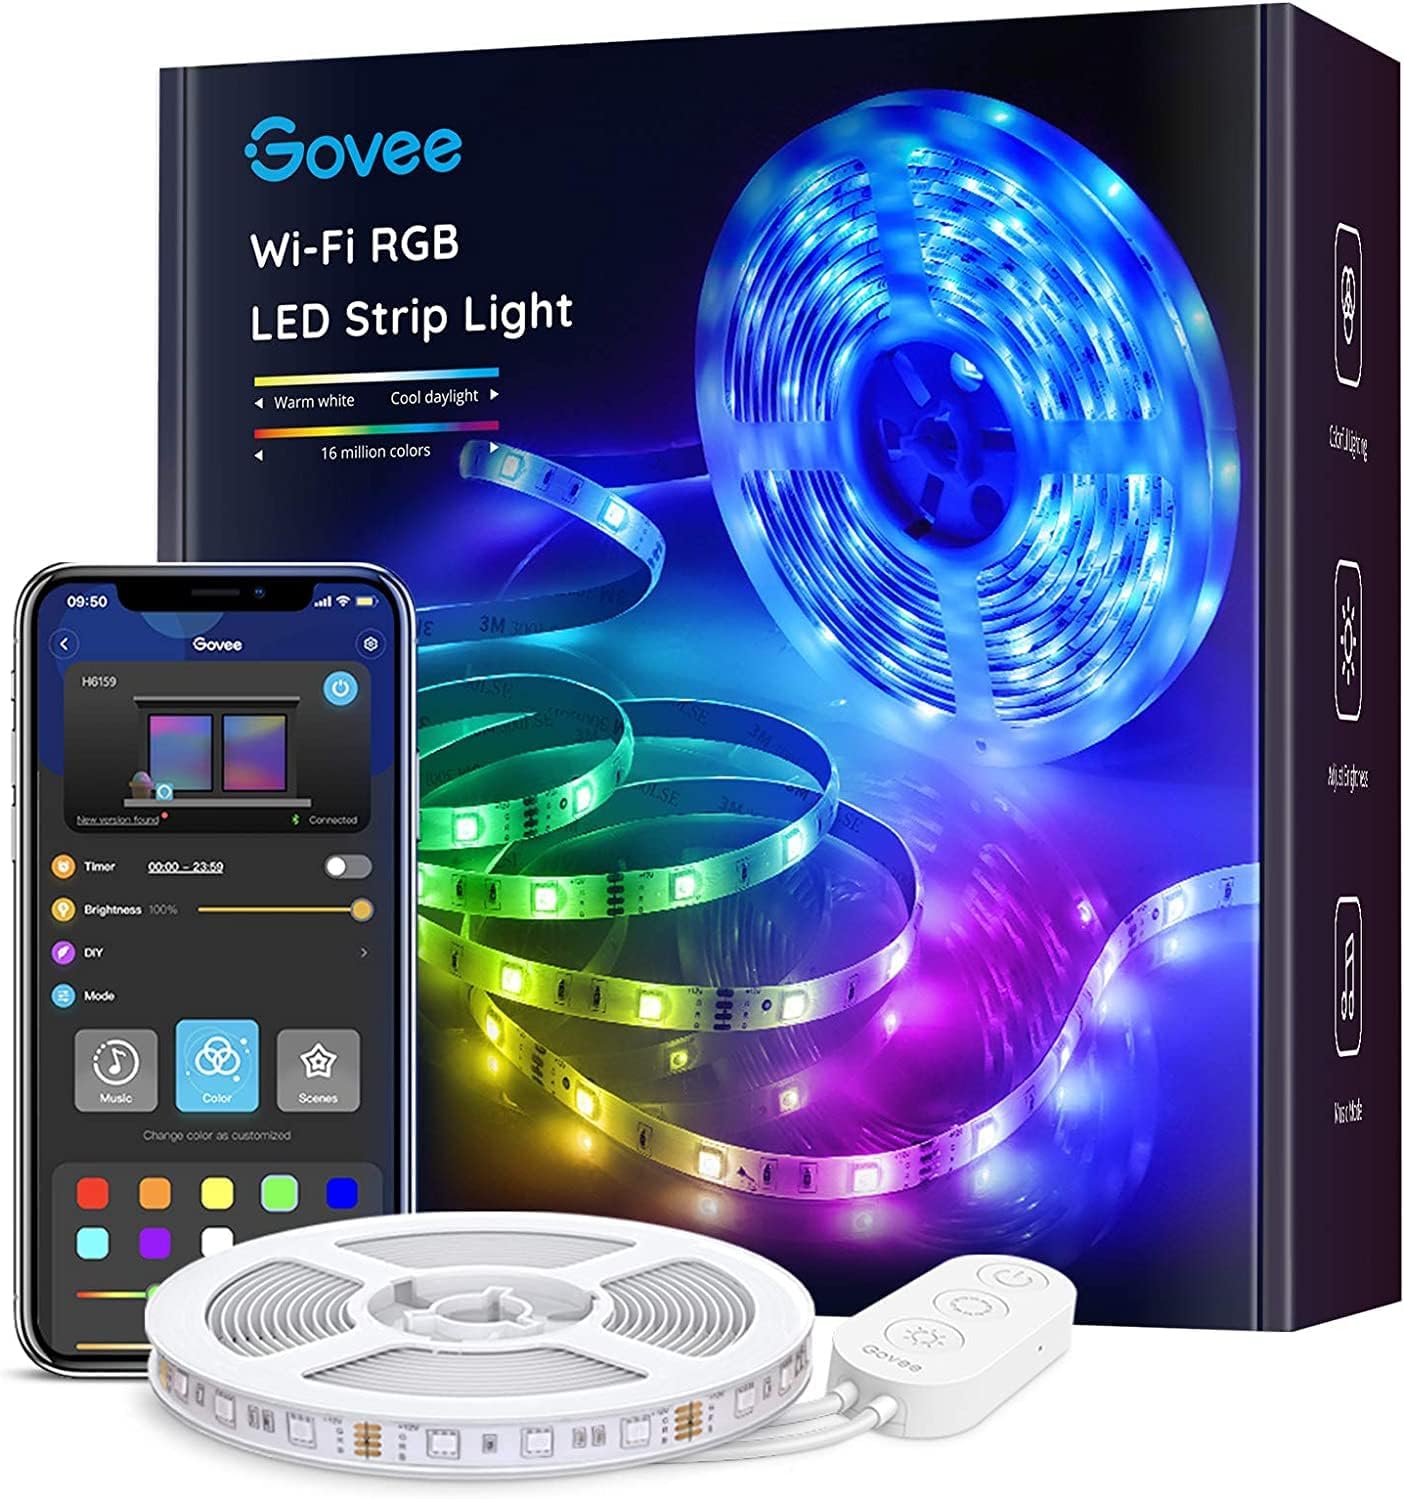 A box of Govee smart strip lights pictures next to a phone with the controls